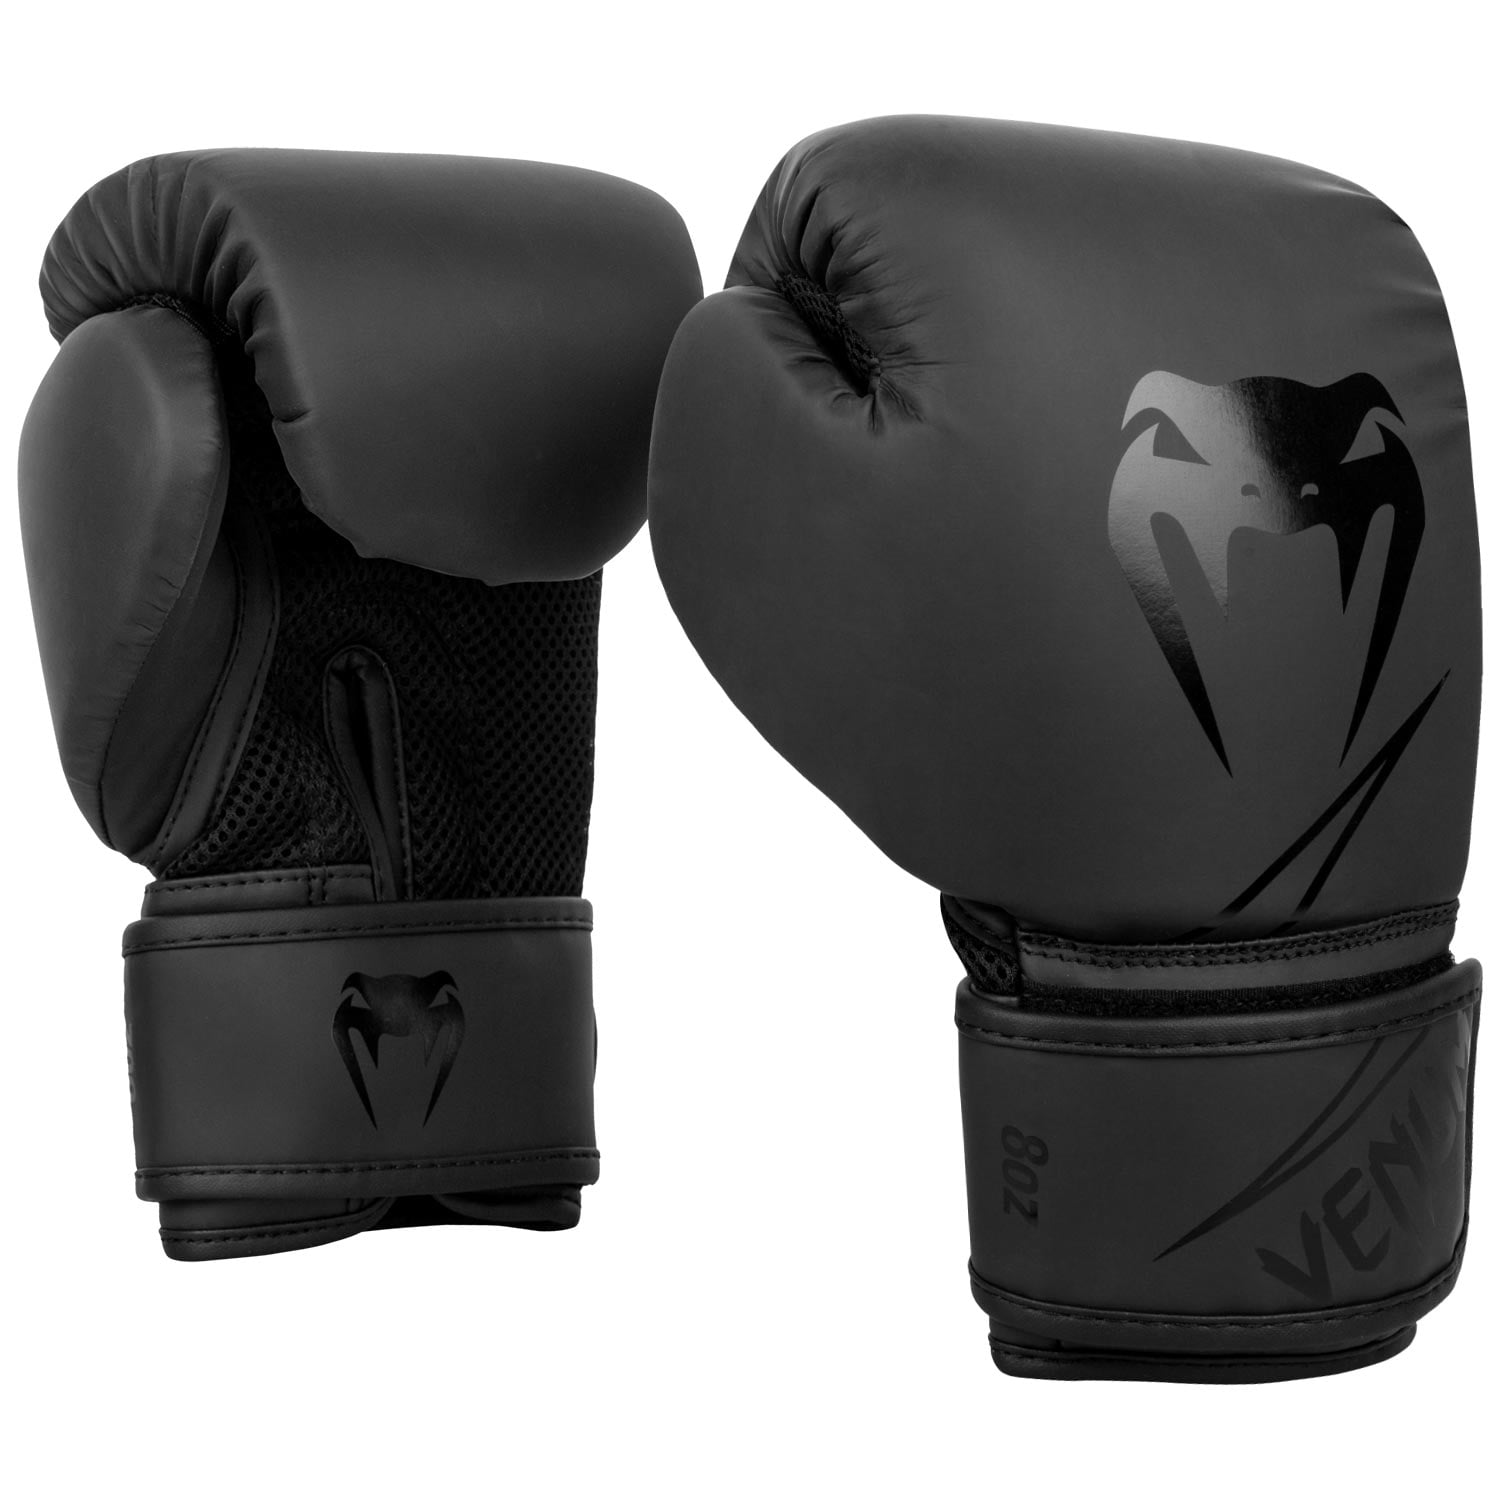 MBX Contender Boxing gloves Kick MMA Hand wraps Mitts Brand new Size Large 